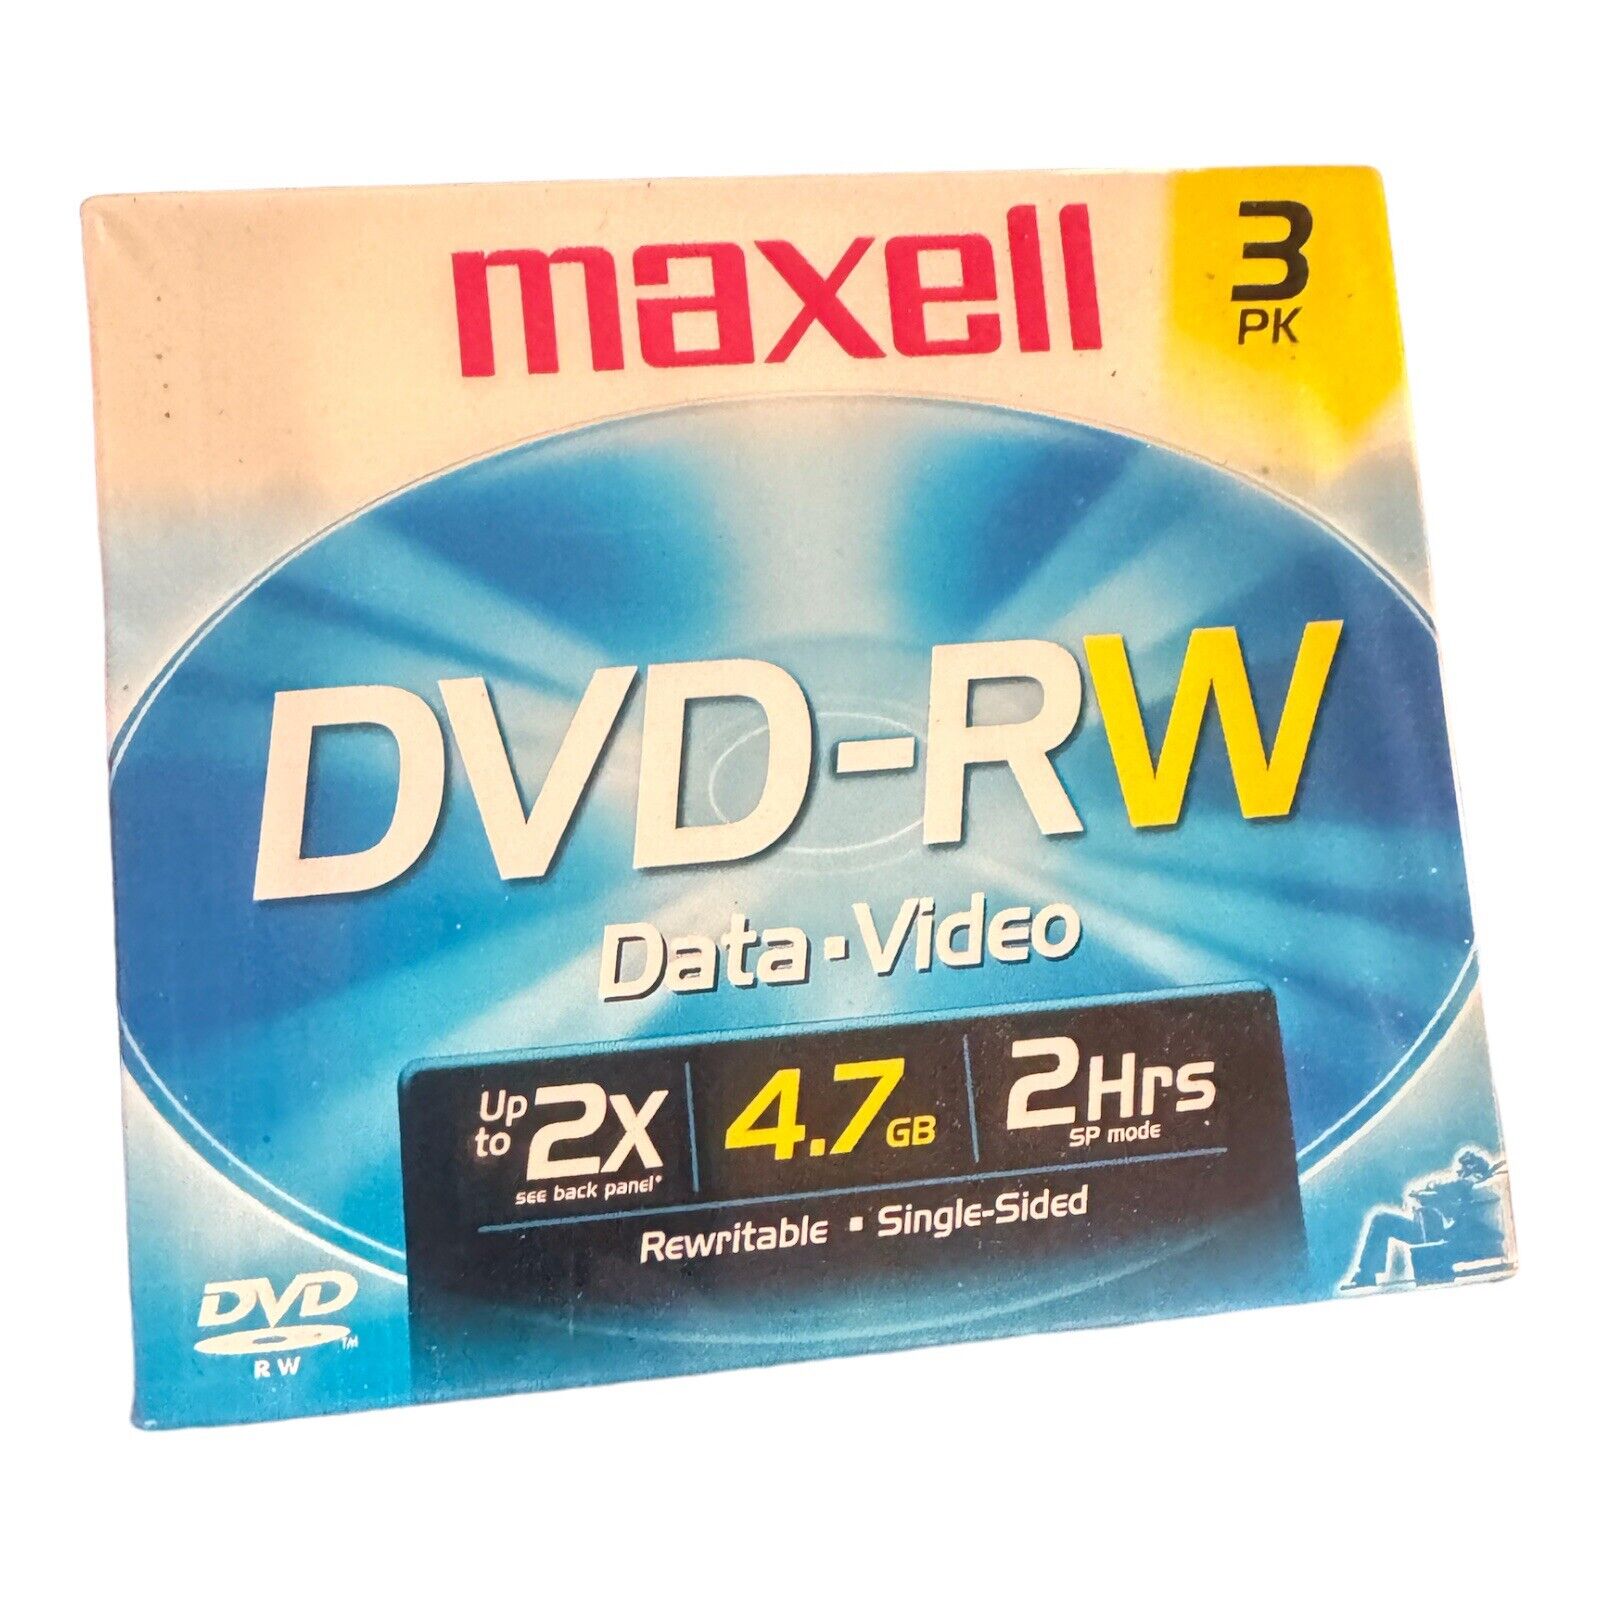 Maxwell DVD-RW Data-Video 3 Blank Recordable Collectible Disc Retro Discontinued